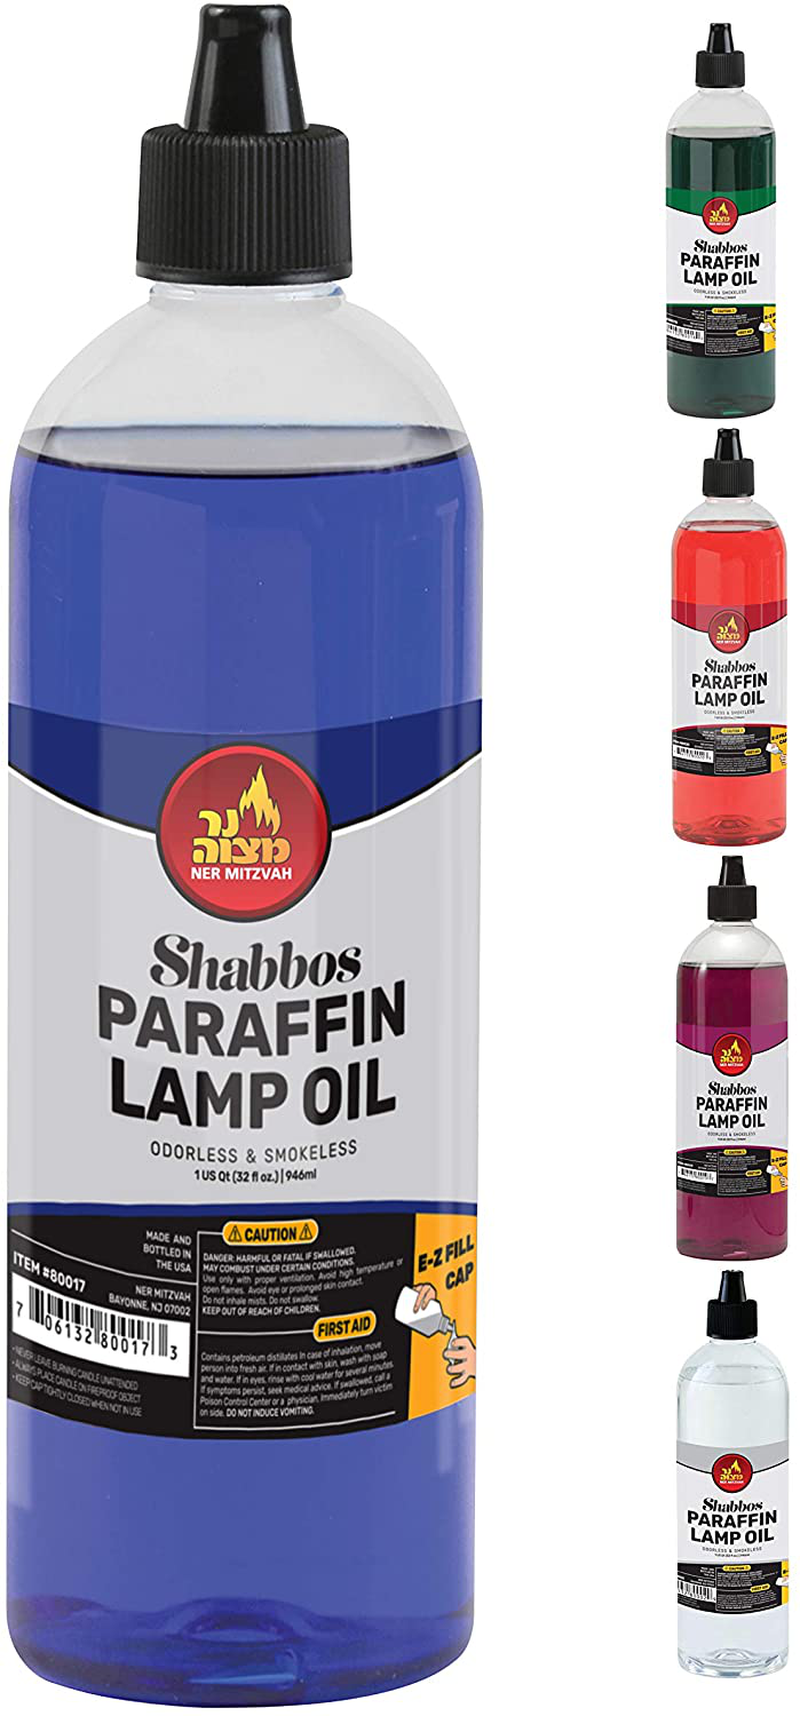 Paraffin Lamp Oil - Blue Smokeless, Odorless, Clean Burning Fuel for Indoor and Outdoor Use with E-Z Fill Cap and Pouring Spout - 32oz - by Ner Mitzvah